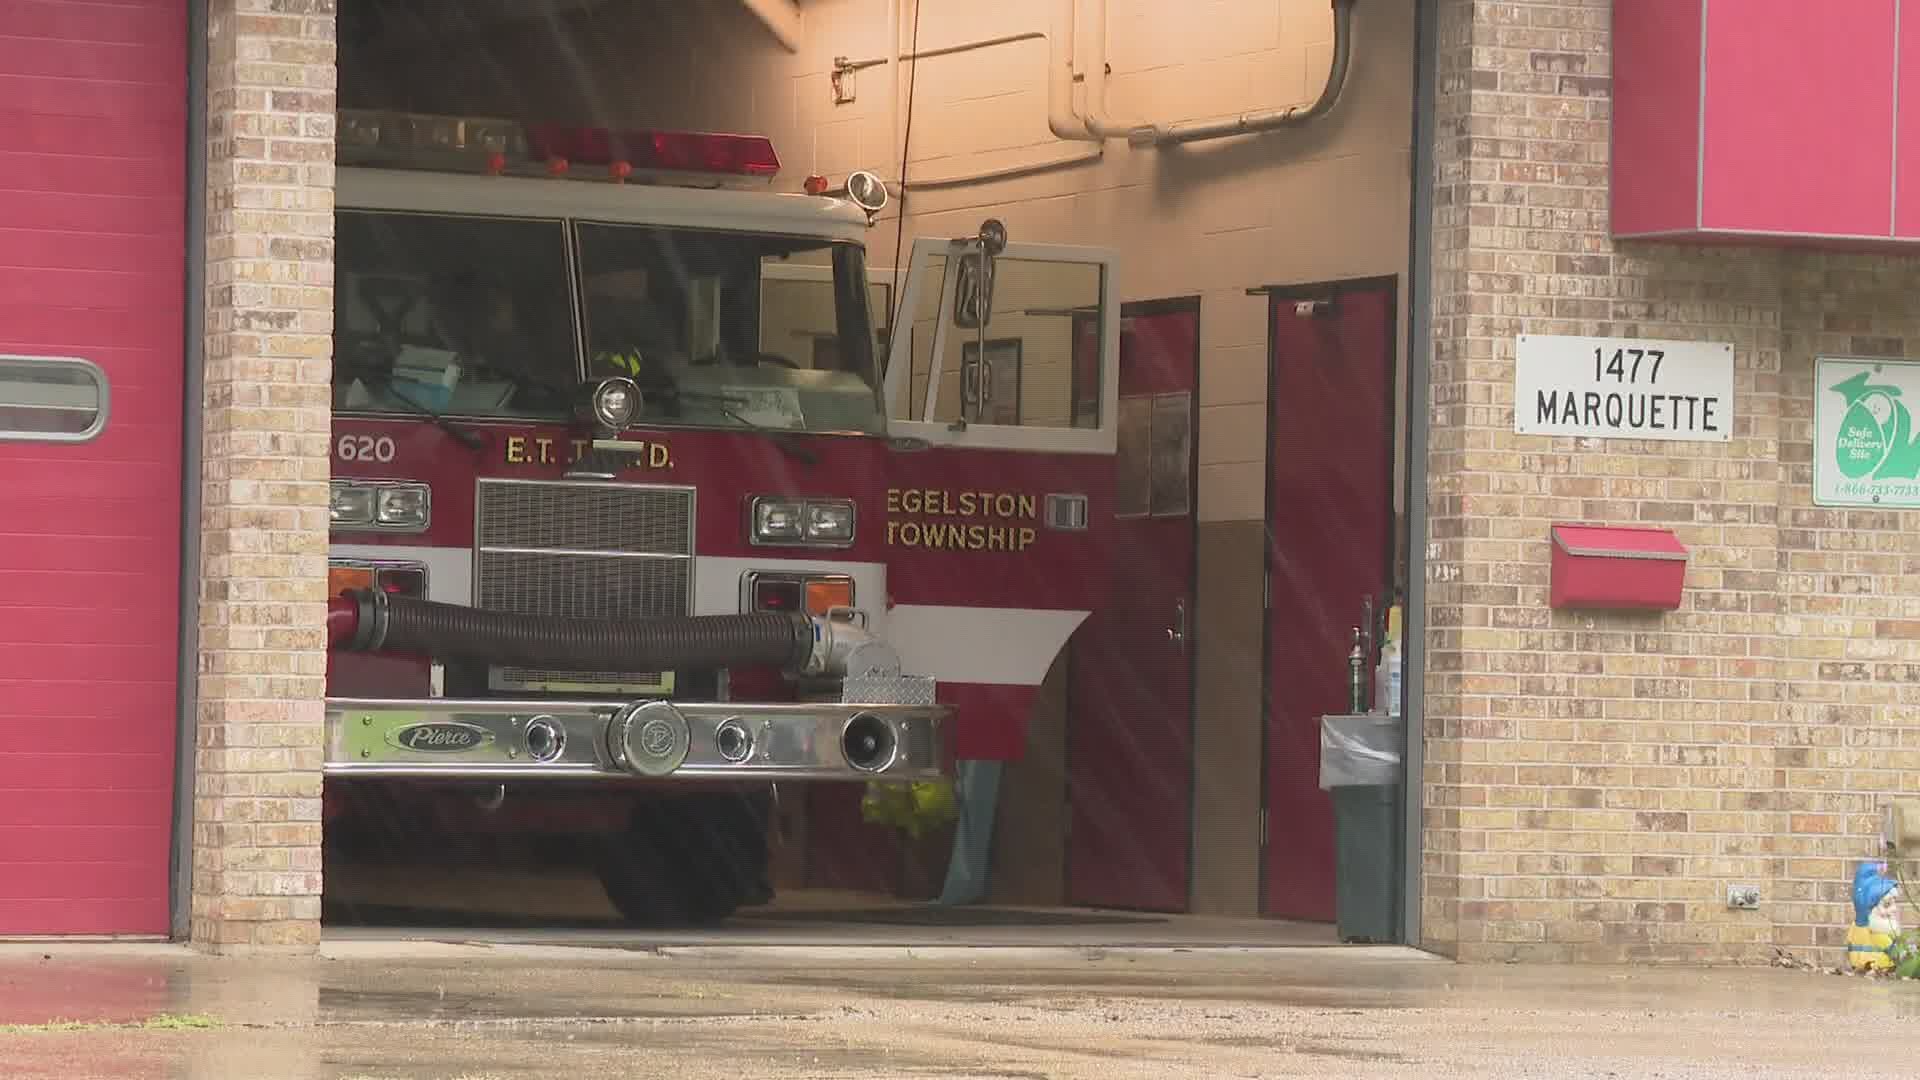 Muskegon's fire department has used an engine from Muskegon Township for one week, and an engine from Egelston Township for 18 days.